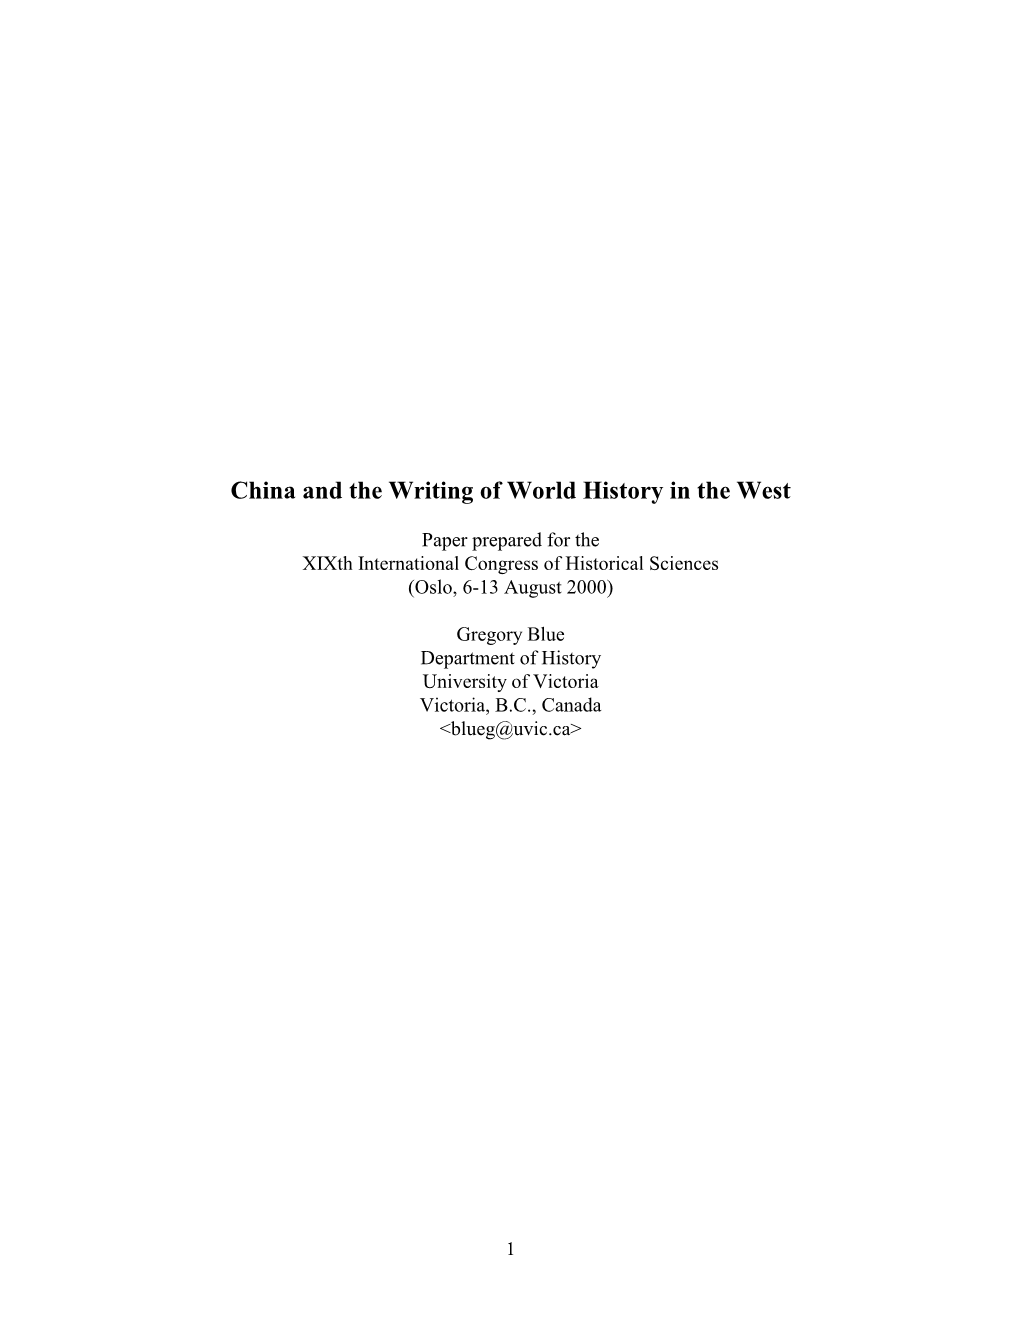 China and the Writing of World History in the West